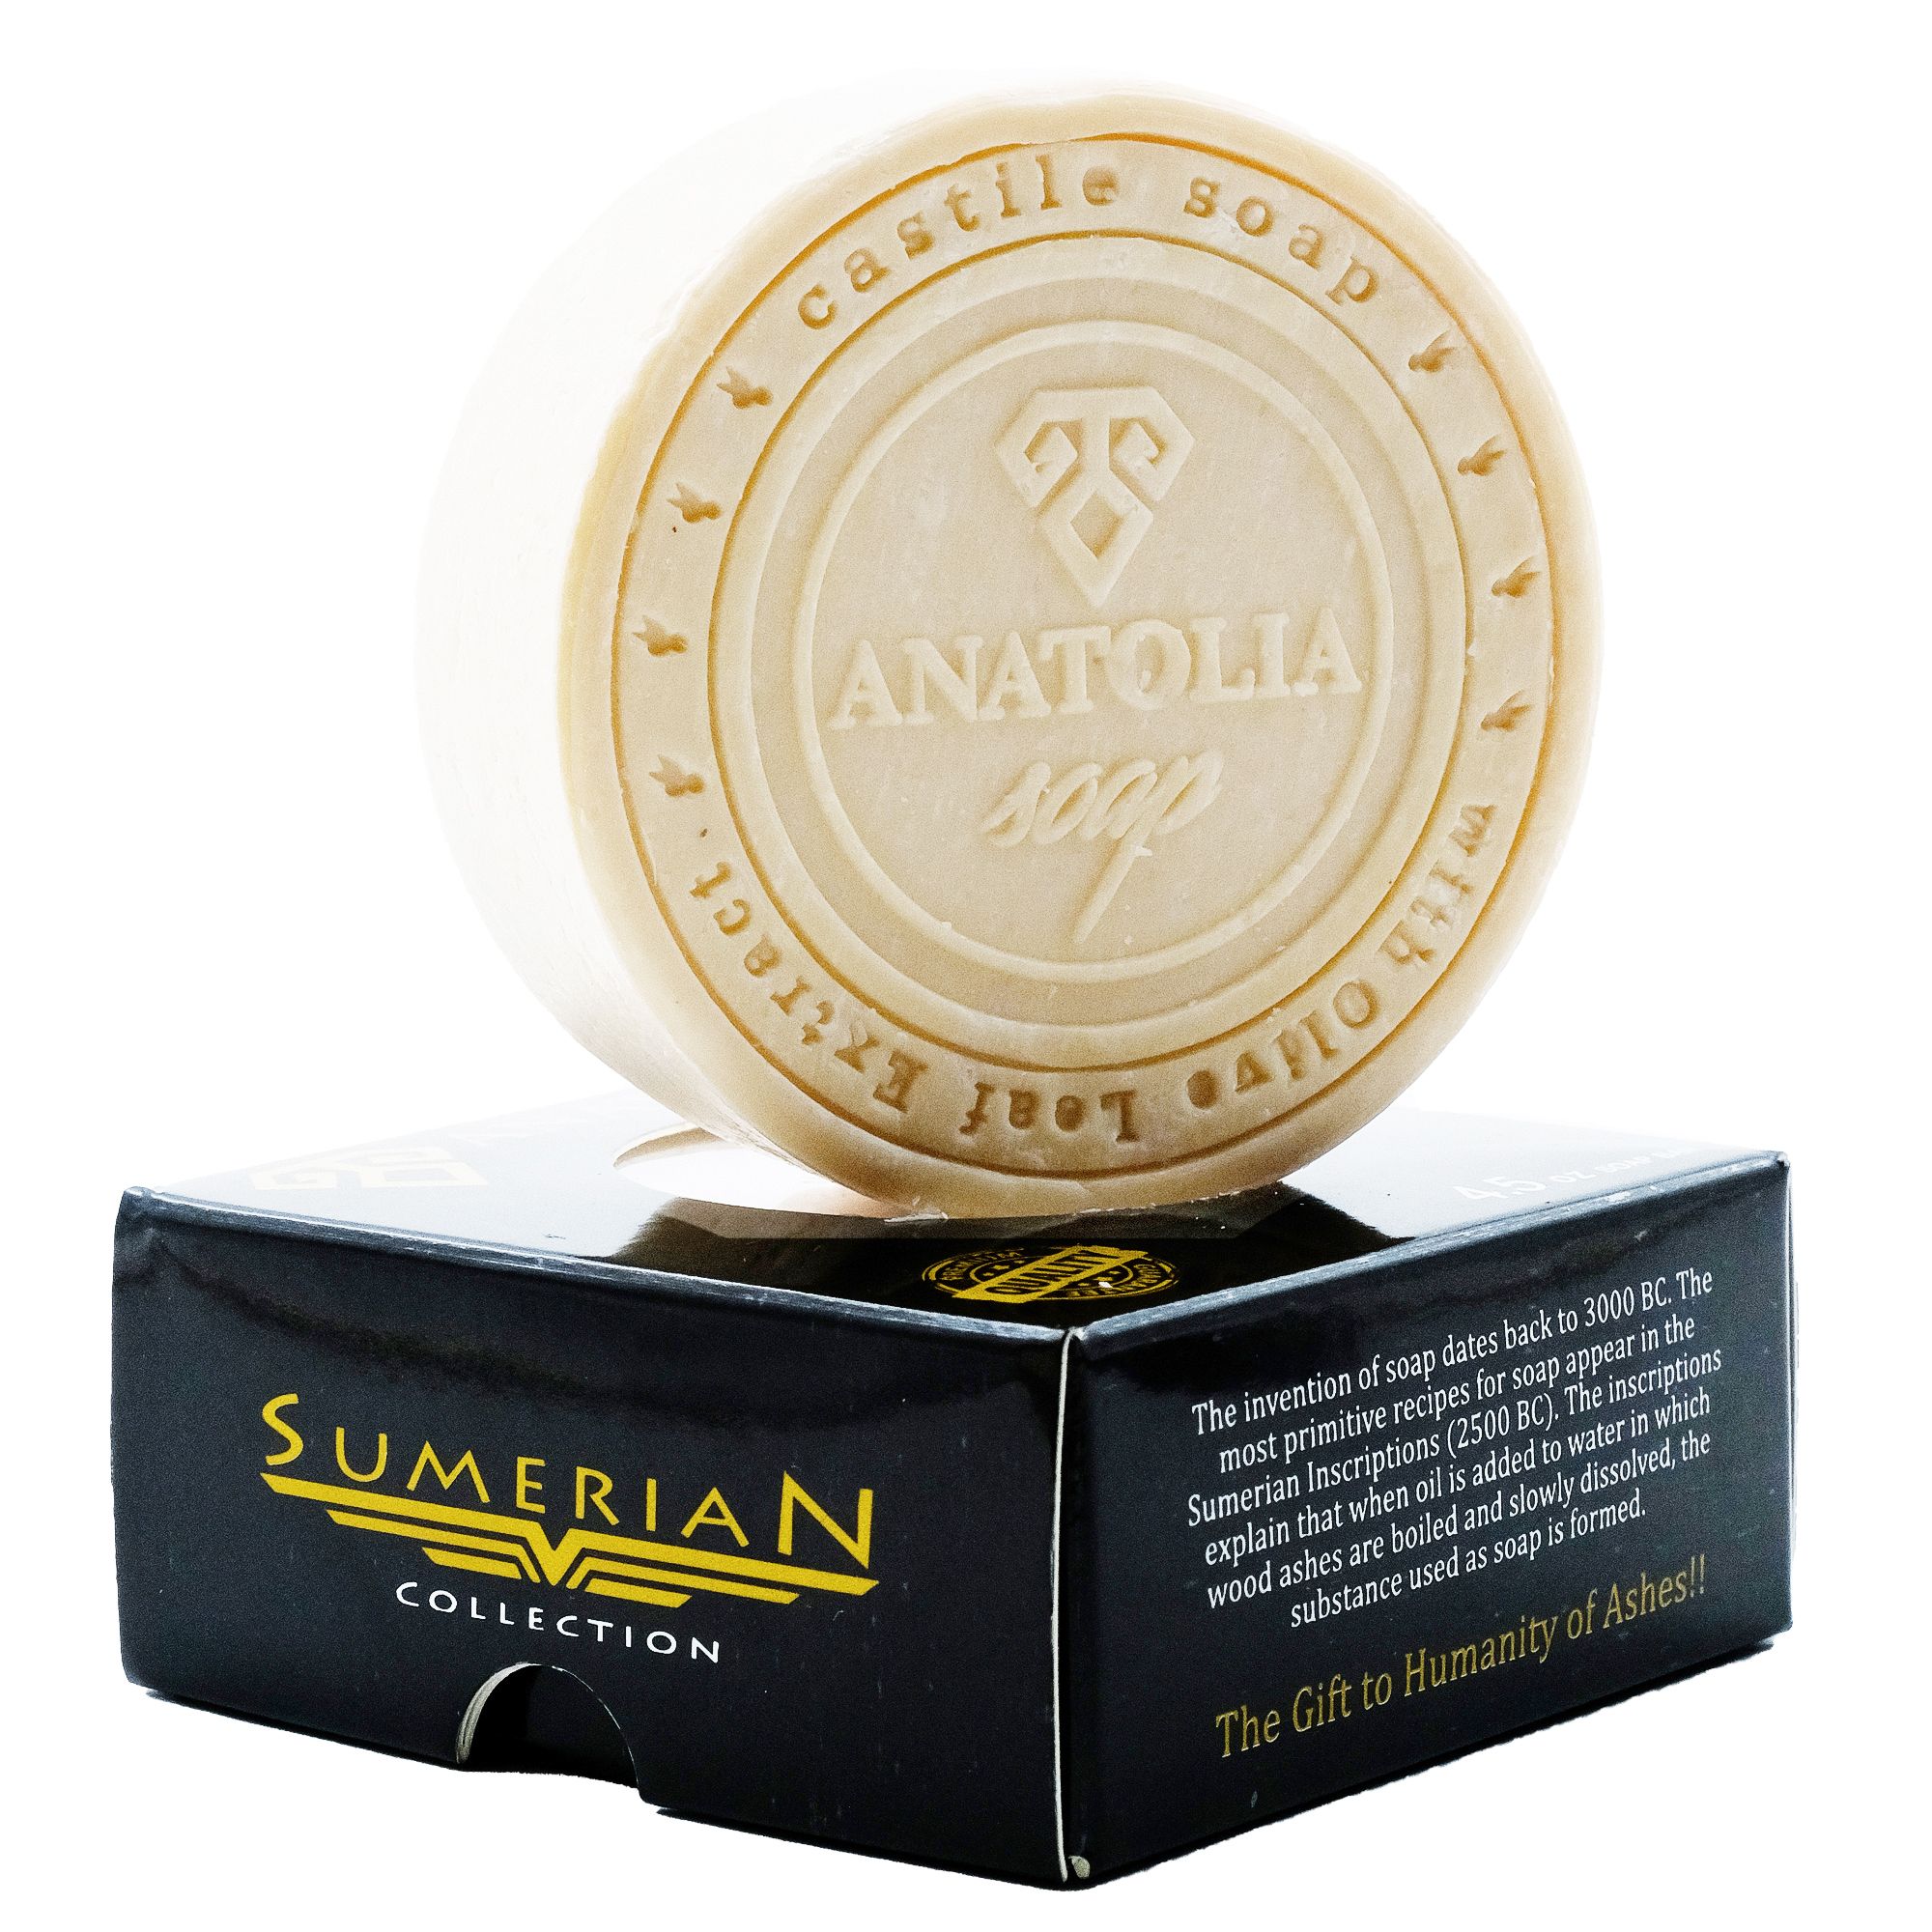 Sumerian Collection Sandalwood Mastic Lily Of the Valley with Pearl Flower Soap is a masculine fragrance for men. Gives volume to hair and strengthens it.